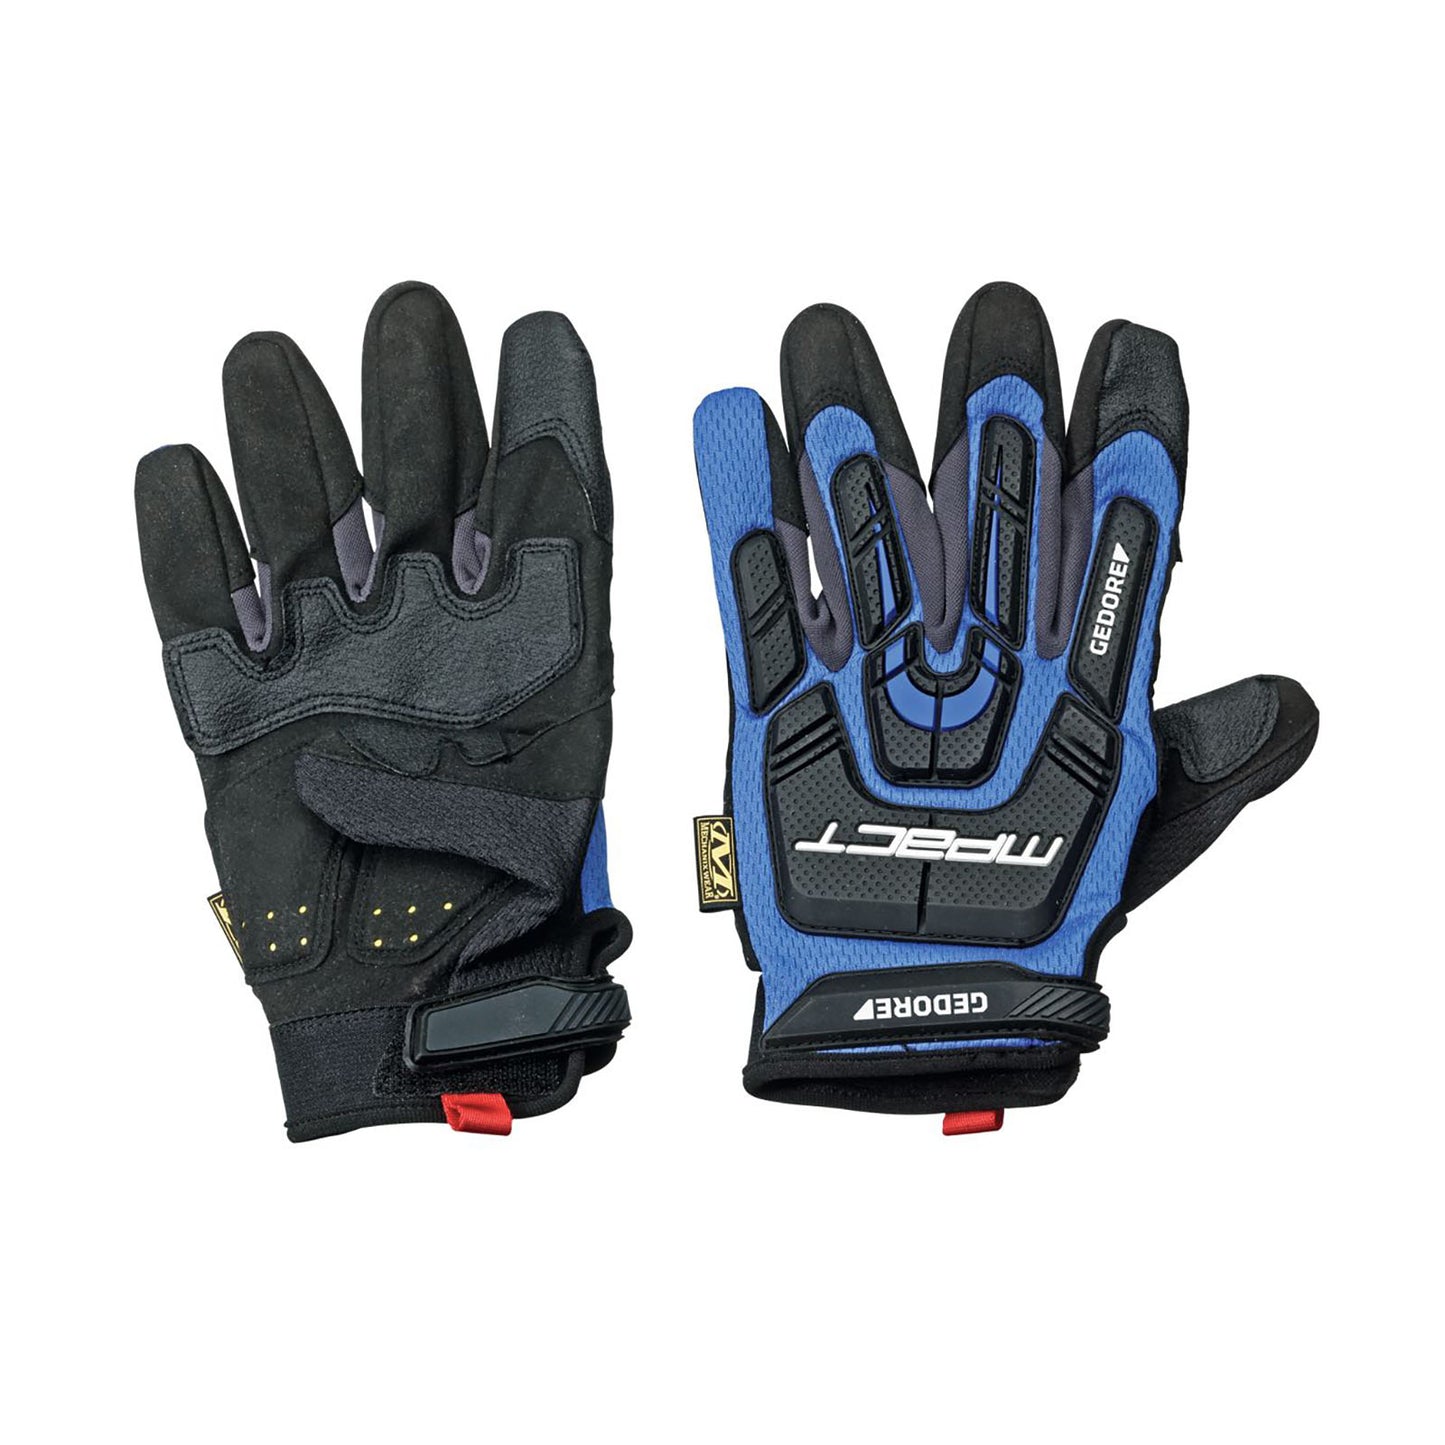 GEDORE 922 9 - Guantes M-PACT Talla M/9 (1938746)